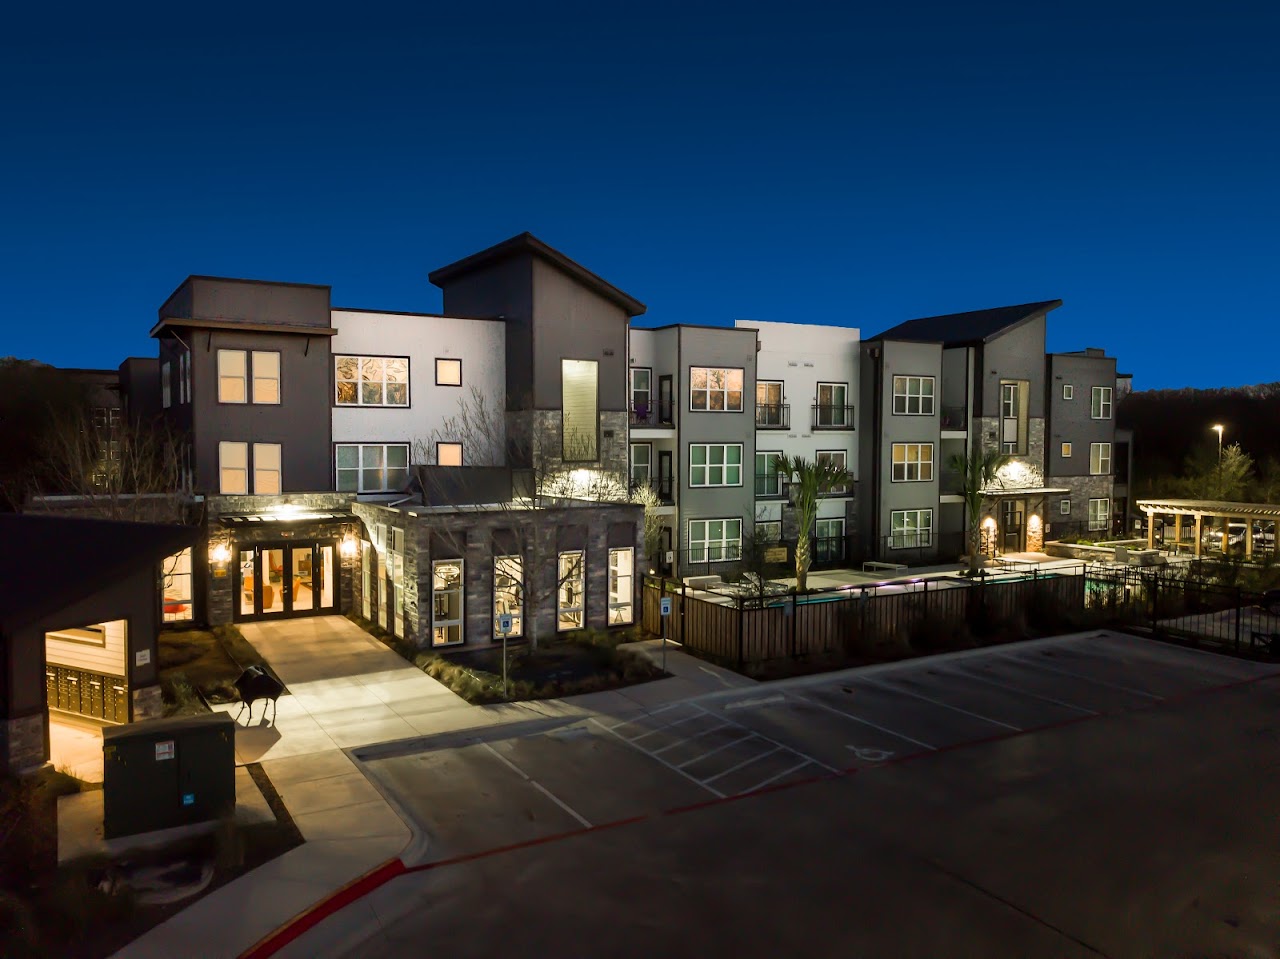 Photo of THINKEAST APARTMENTS. Affordable housing located at 1143 SHADY LANE AUSTIN, TX 78721